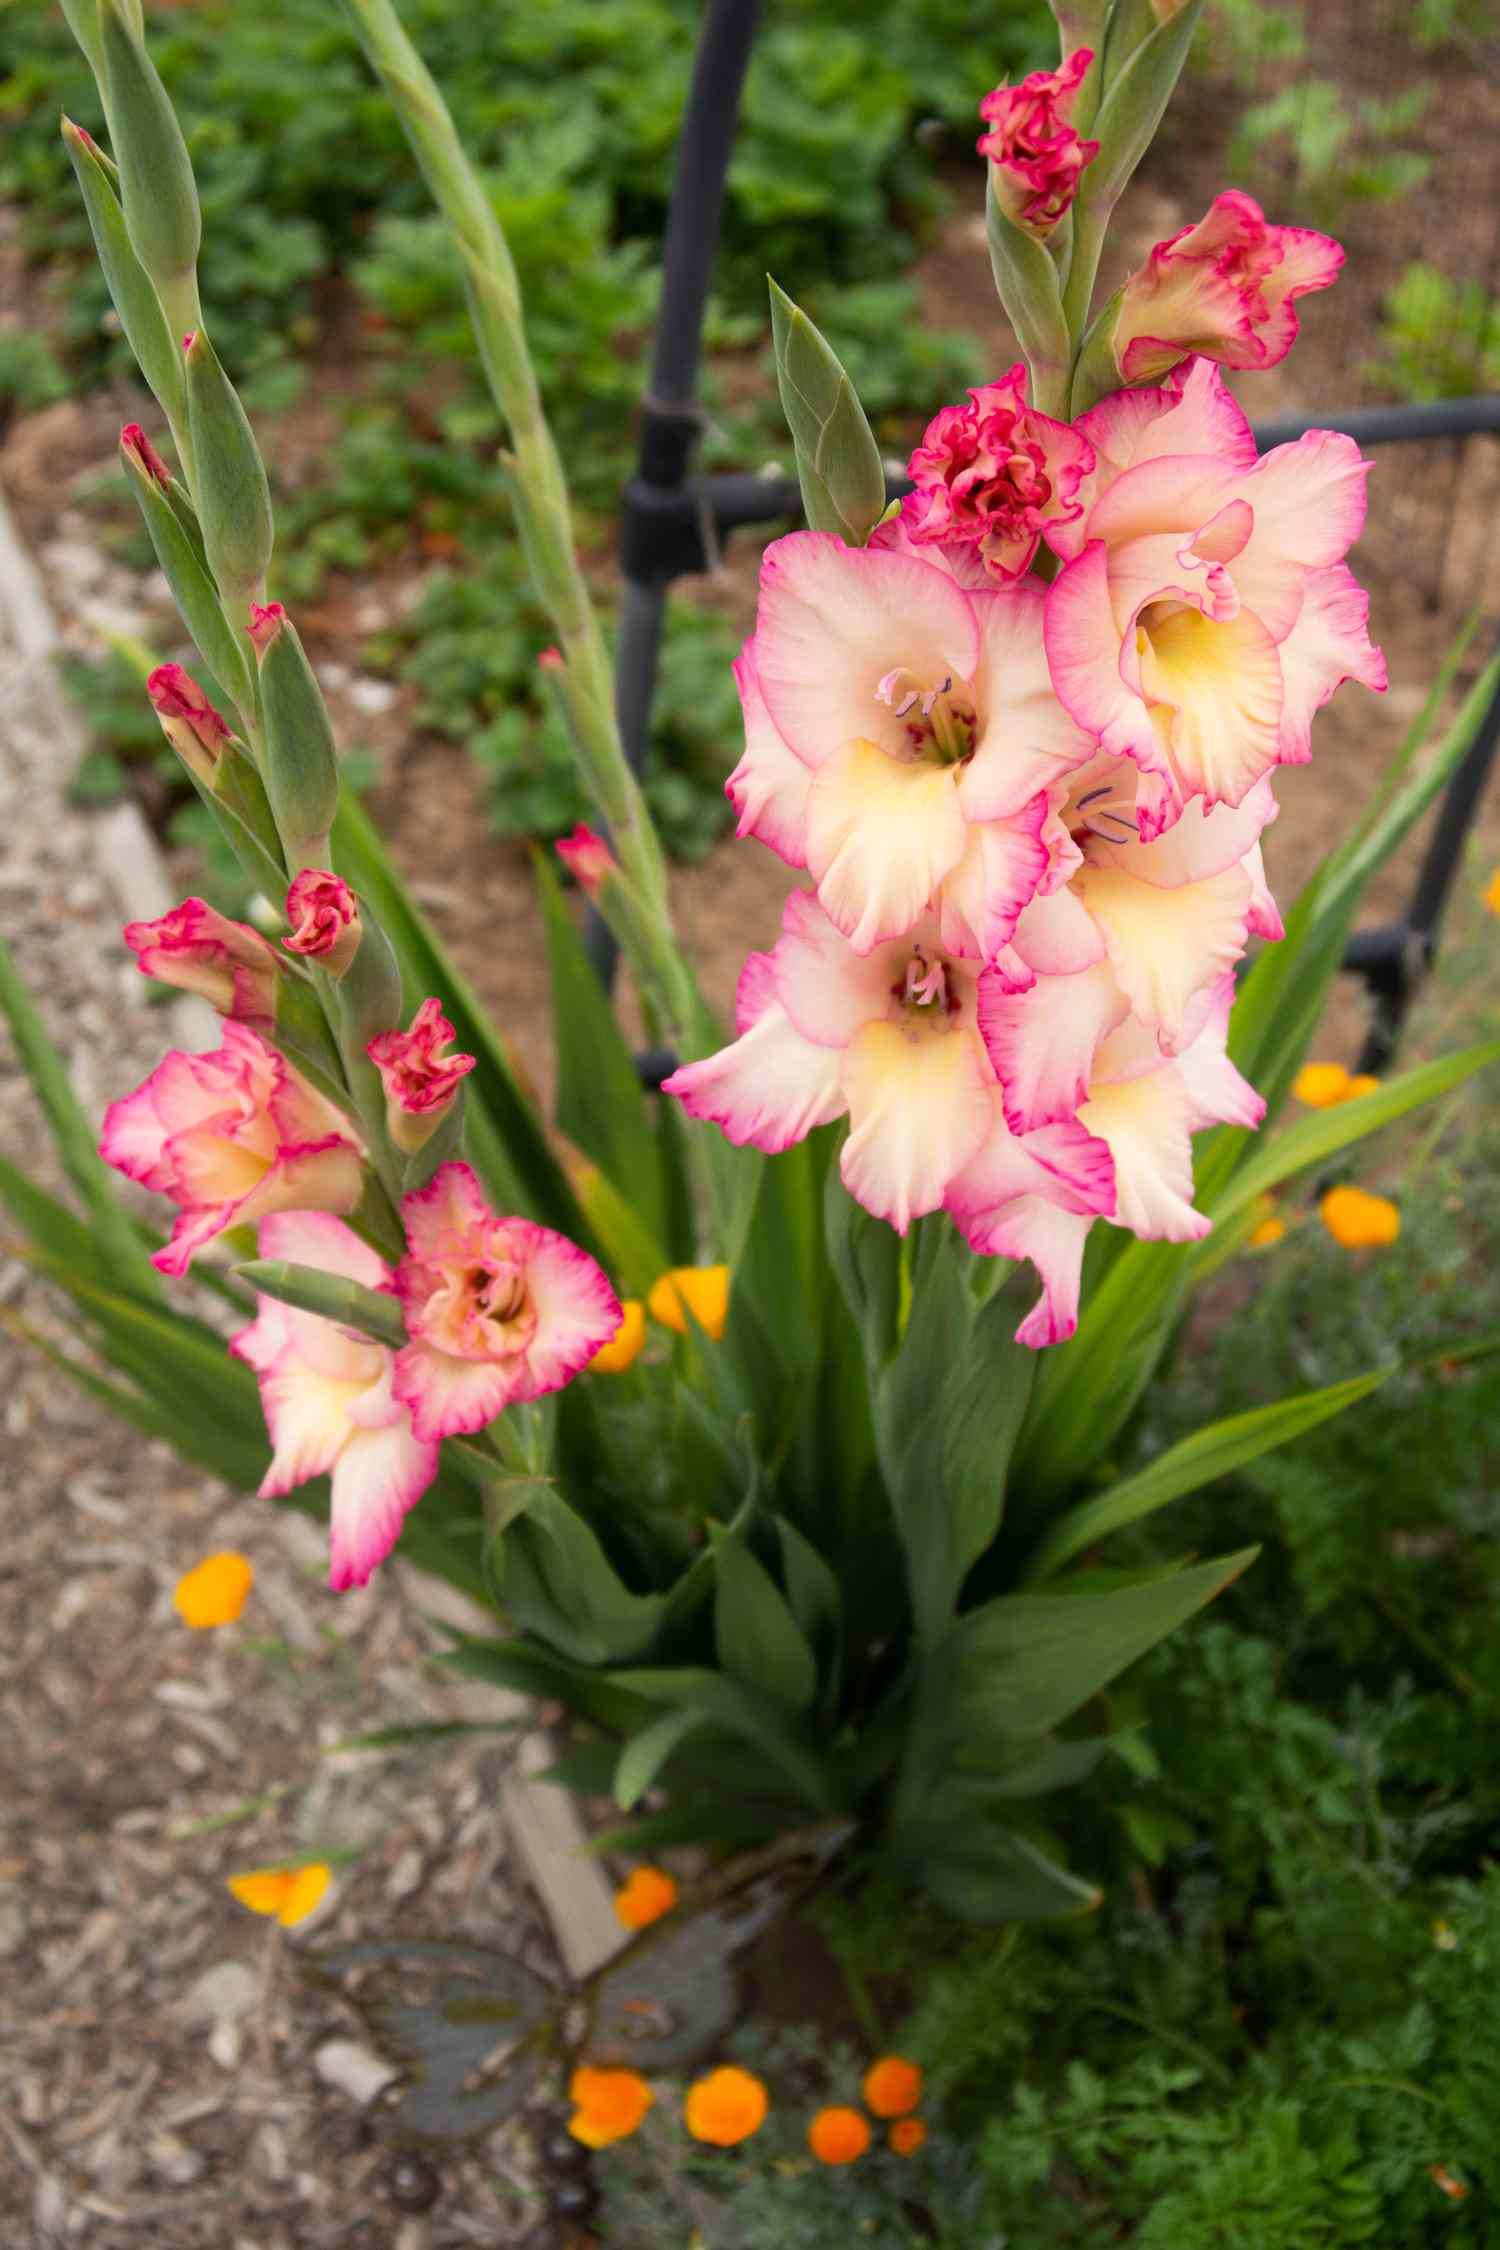 Gladiolus plant with tall flower stalk with cream and pink colored flowers and buds